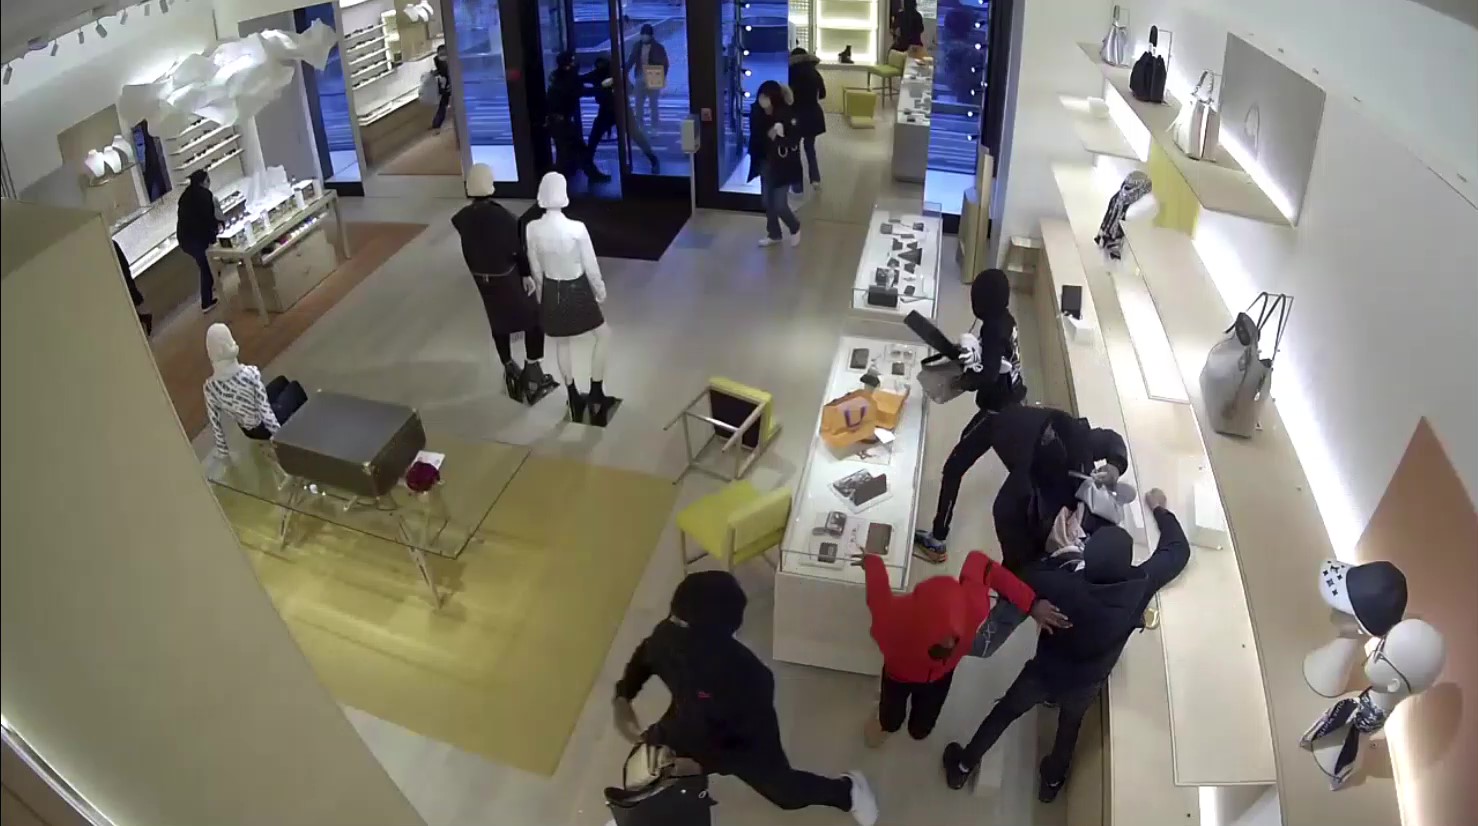 Cops Recover Getaway Vehicle From Oak Brook Jewelry Store Robbery - CBS  Chicago